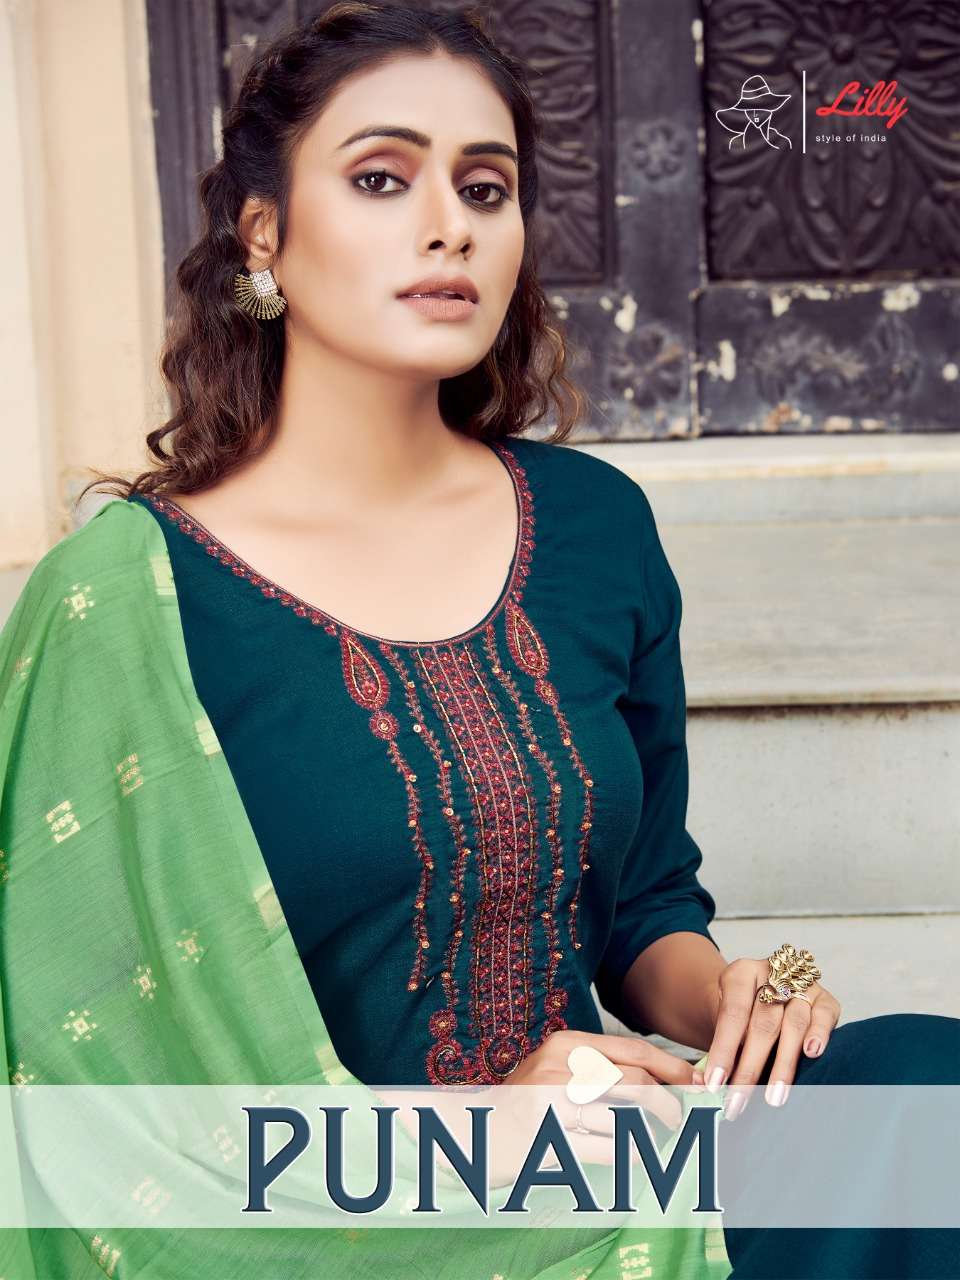 PUNAM BY LILLY STYLE OF INDIA BRAND KASMIRI EMBROIDERY AND HANDWORK KURTI WITH VISCOSE LYCRA PENT AN...